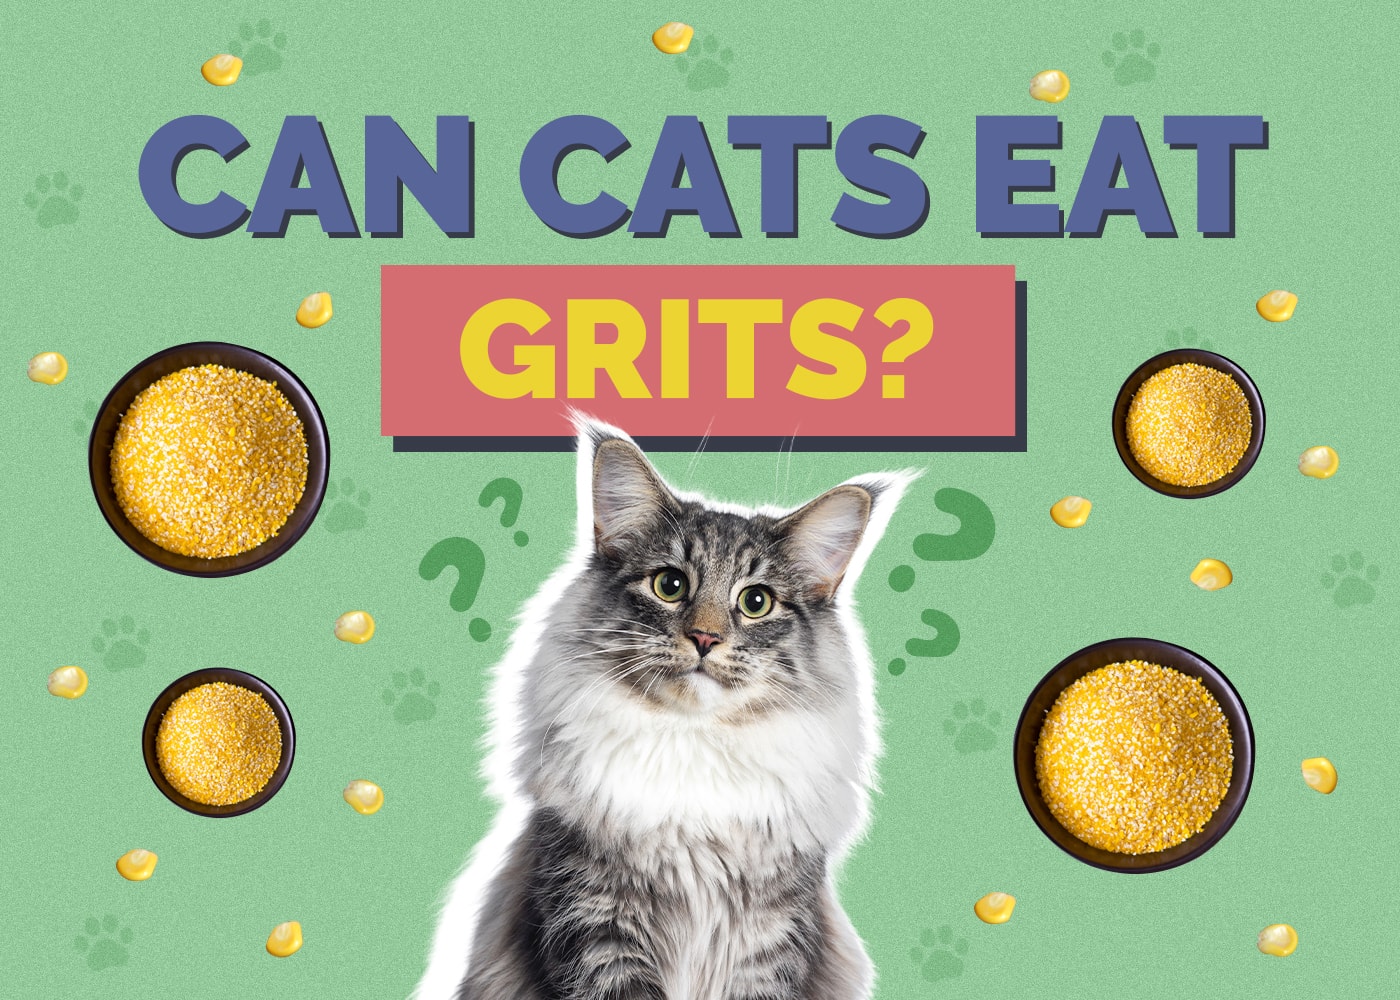 Can Cats Eat grits